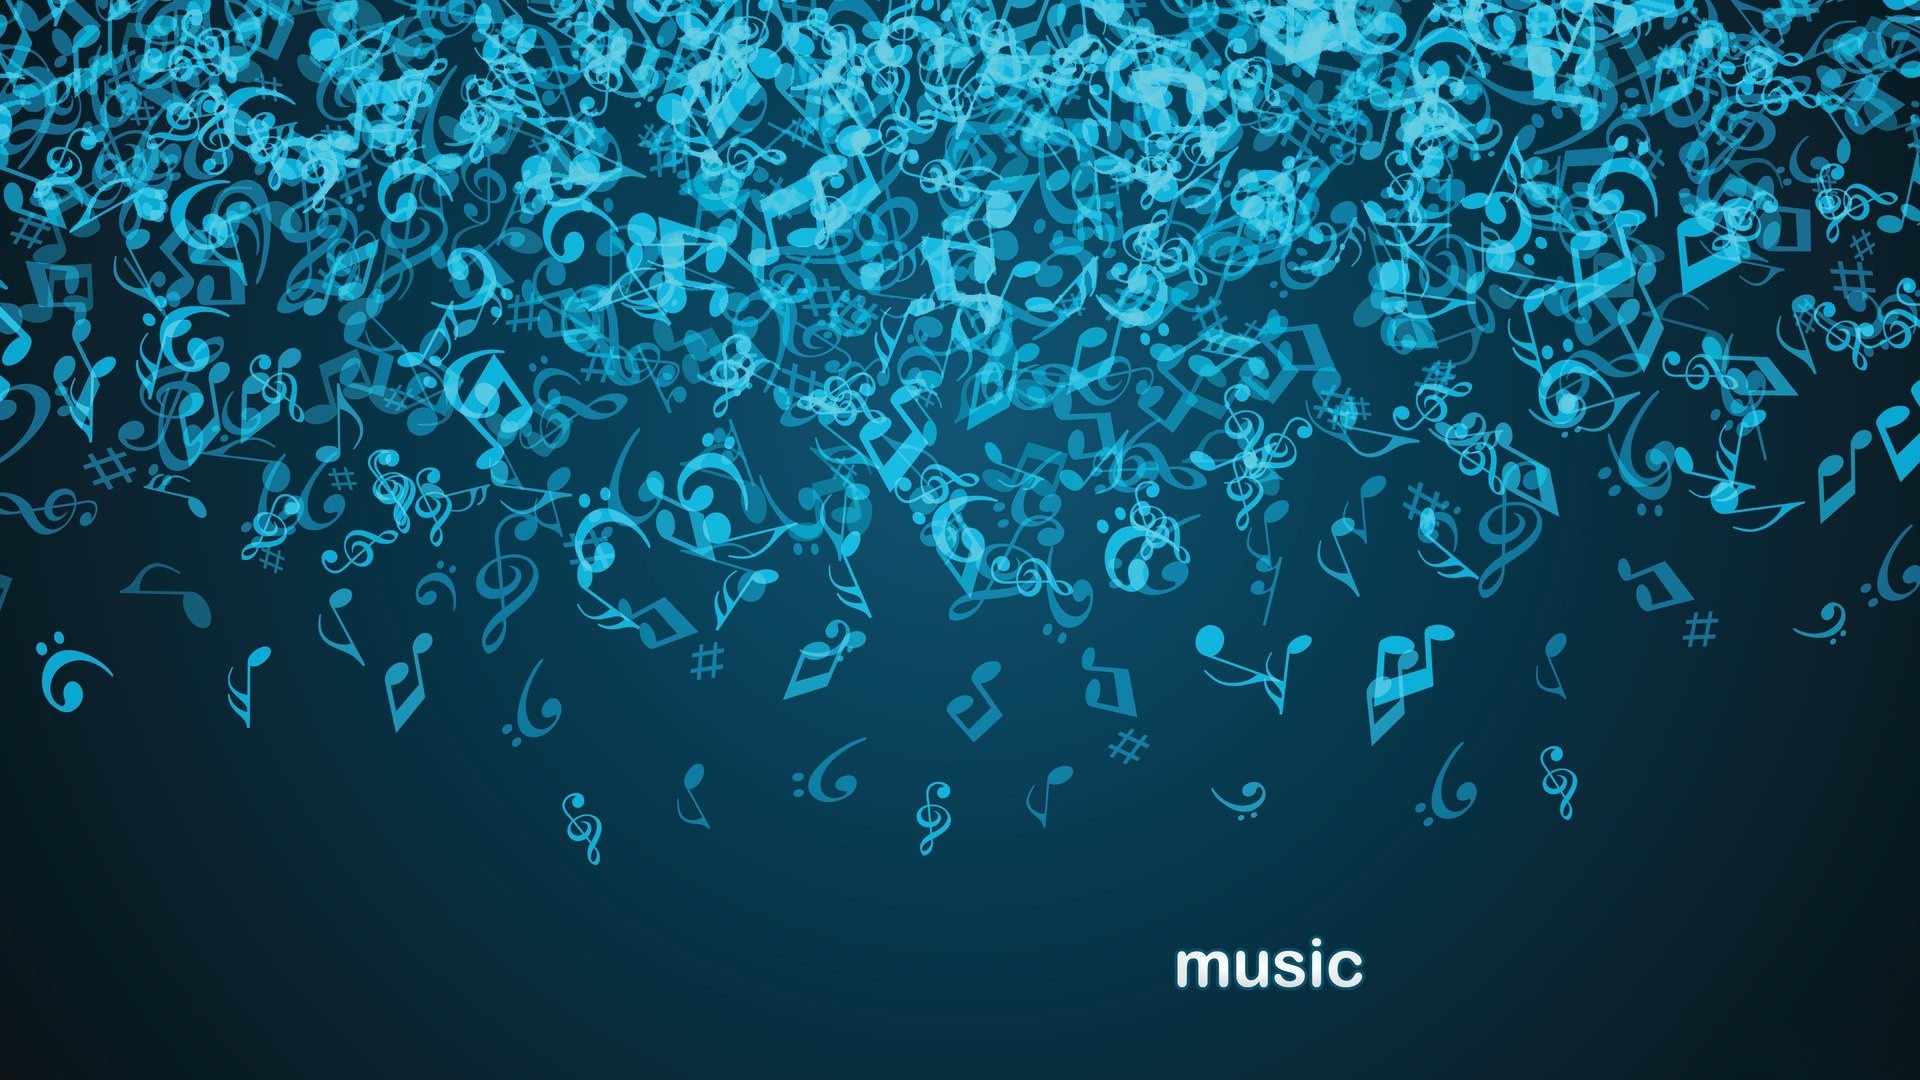 General 1920x1080 music minimalism digital art blue background musical notes typography